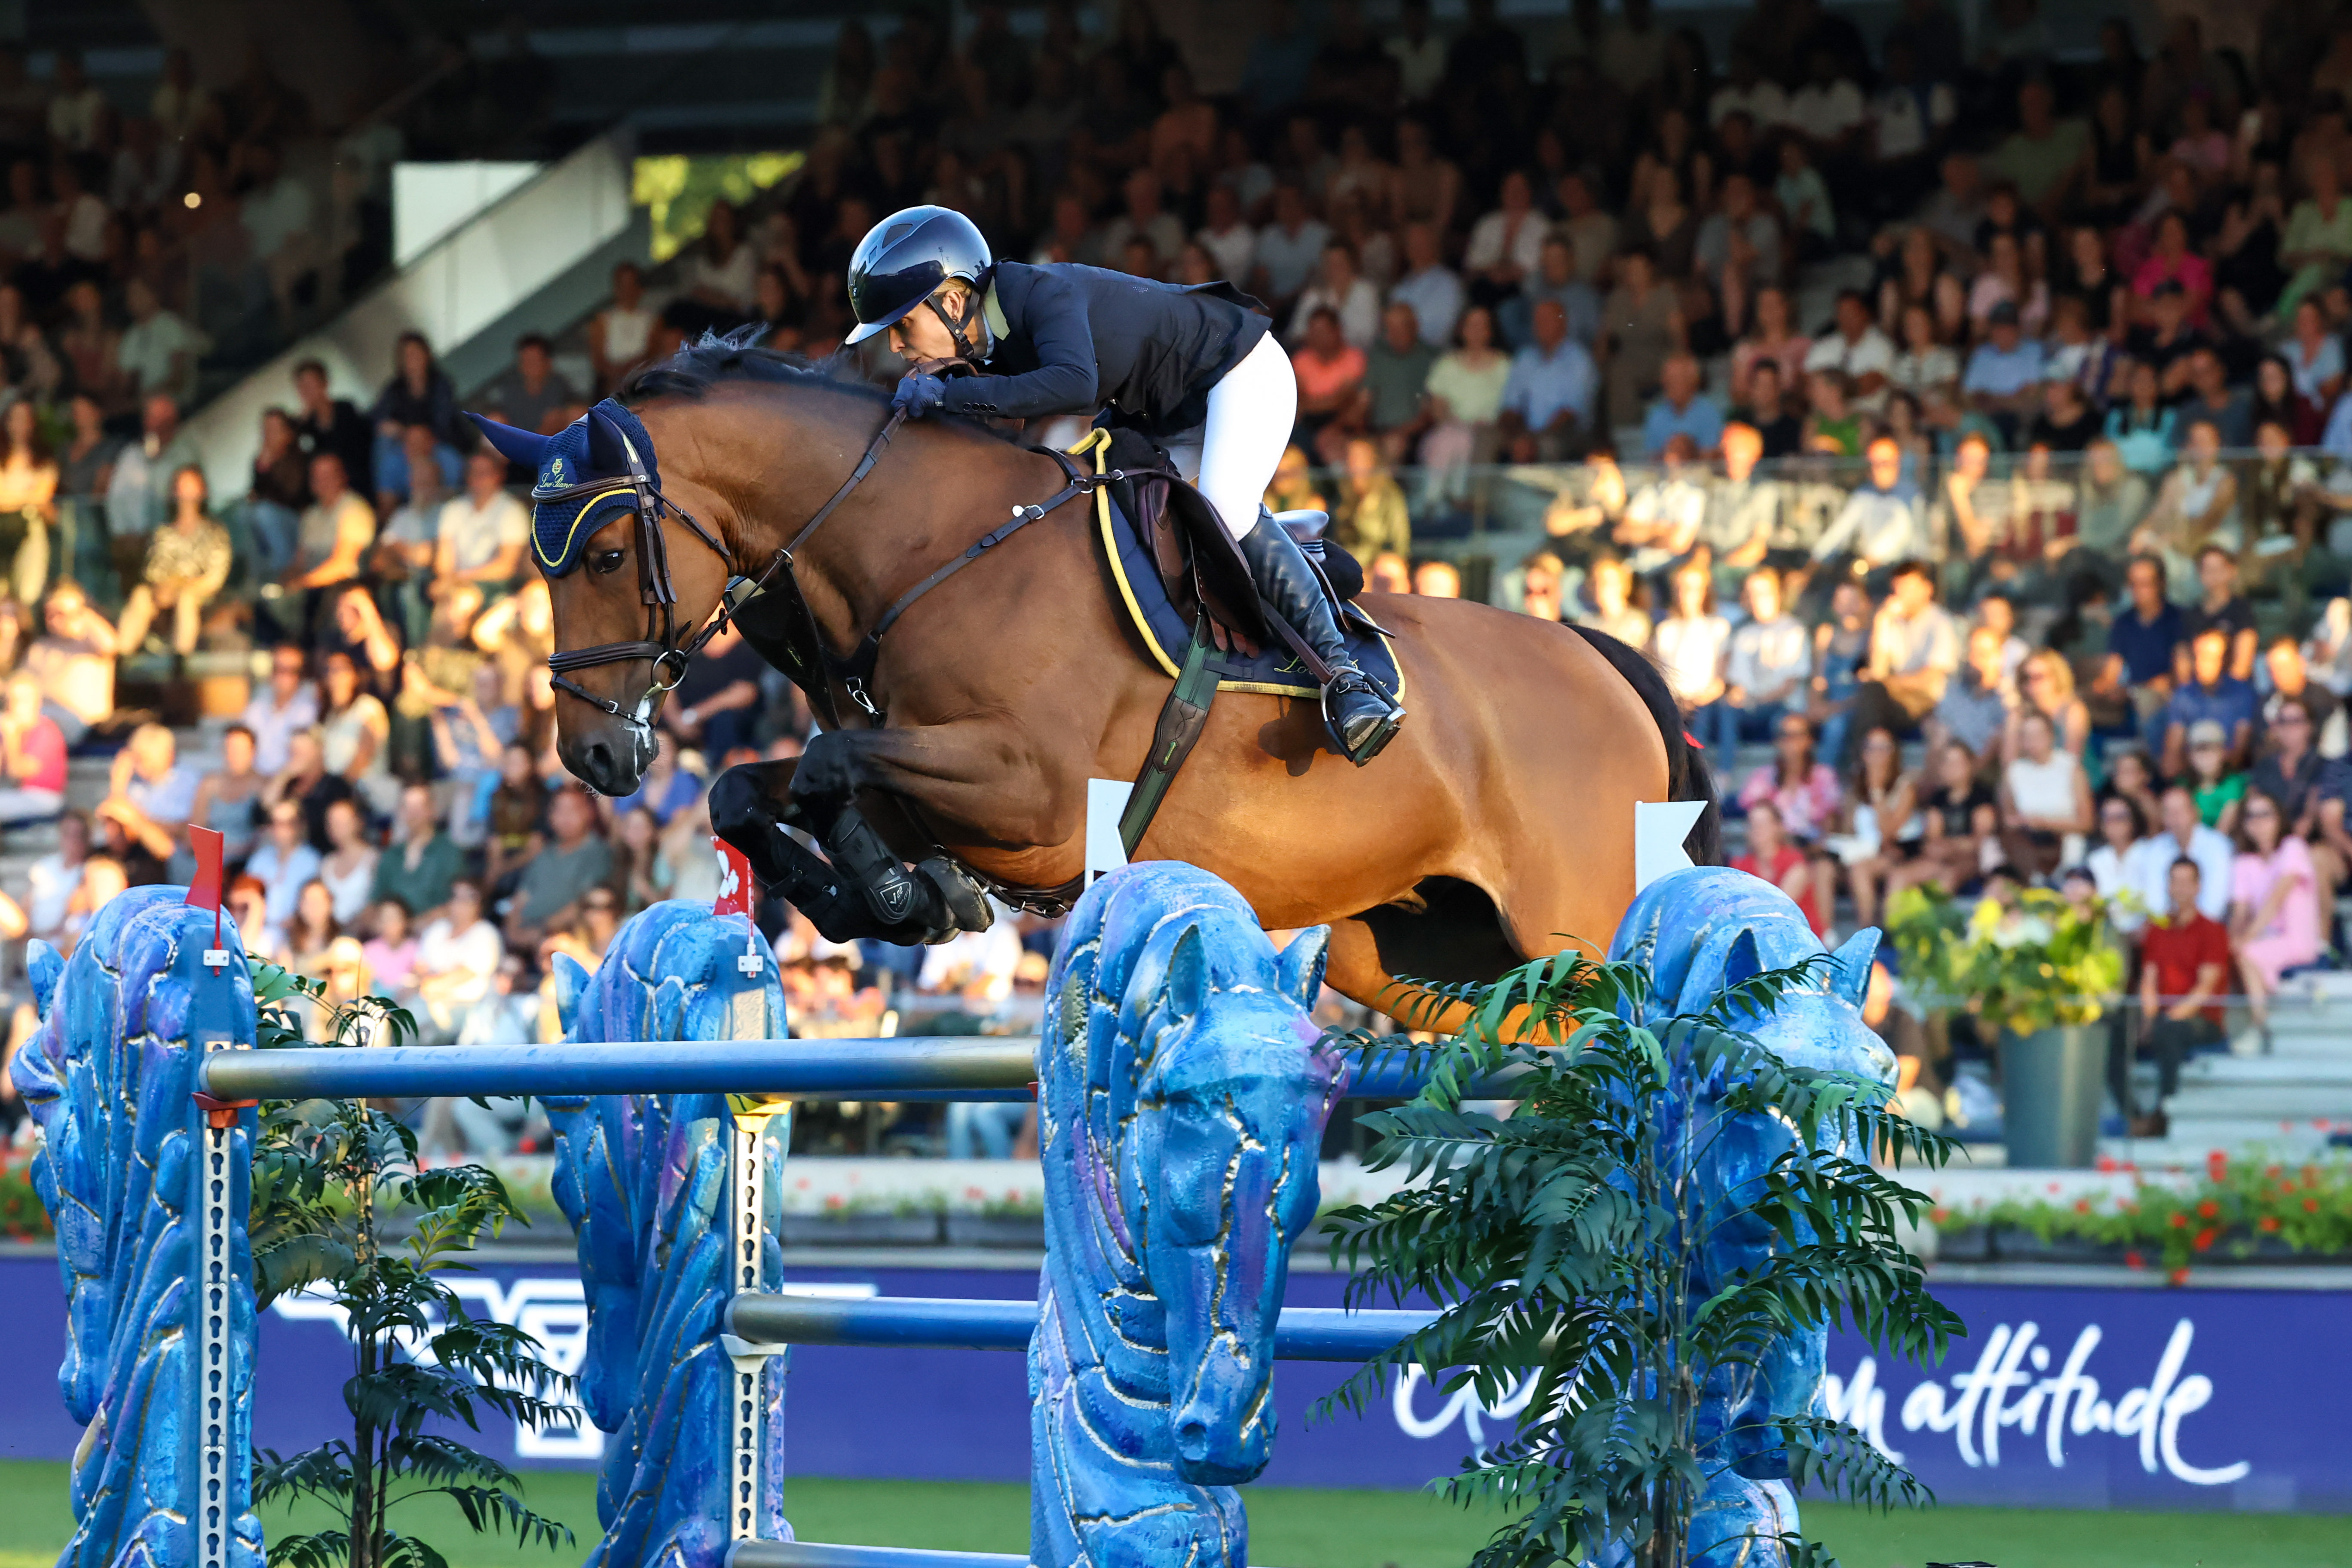 Fourth place finish for Fellow Castlefield in the Longines Global Champions Tour Grand Prix of Valkenswaard